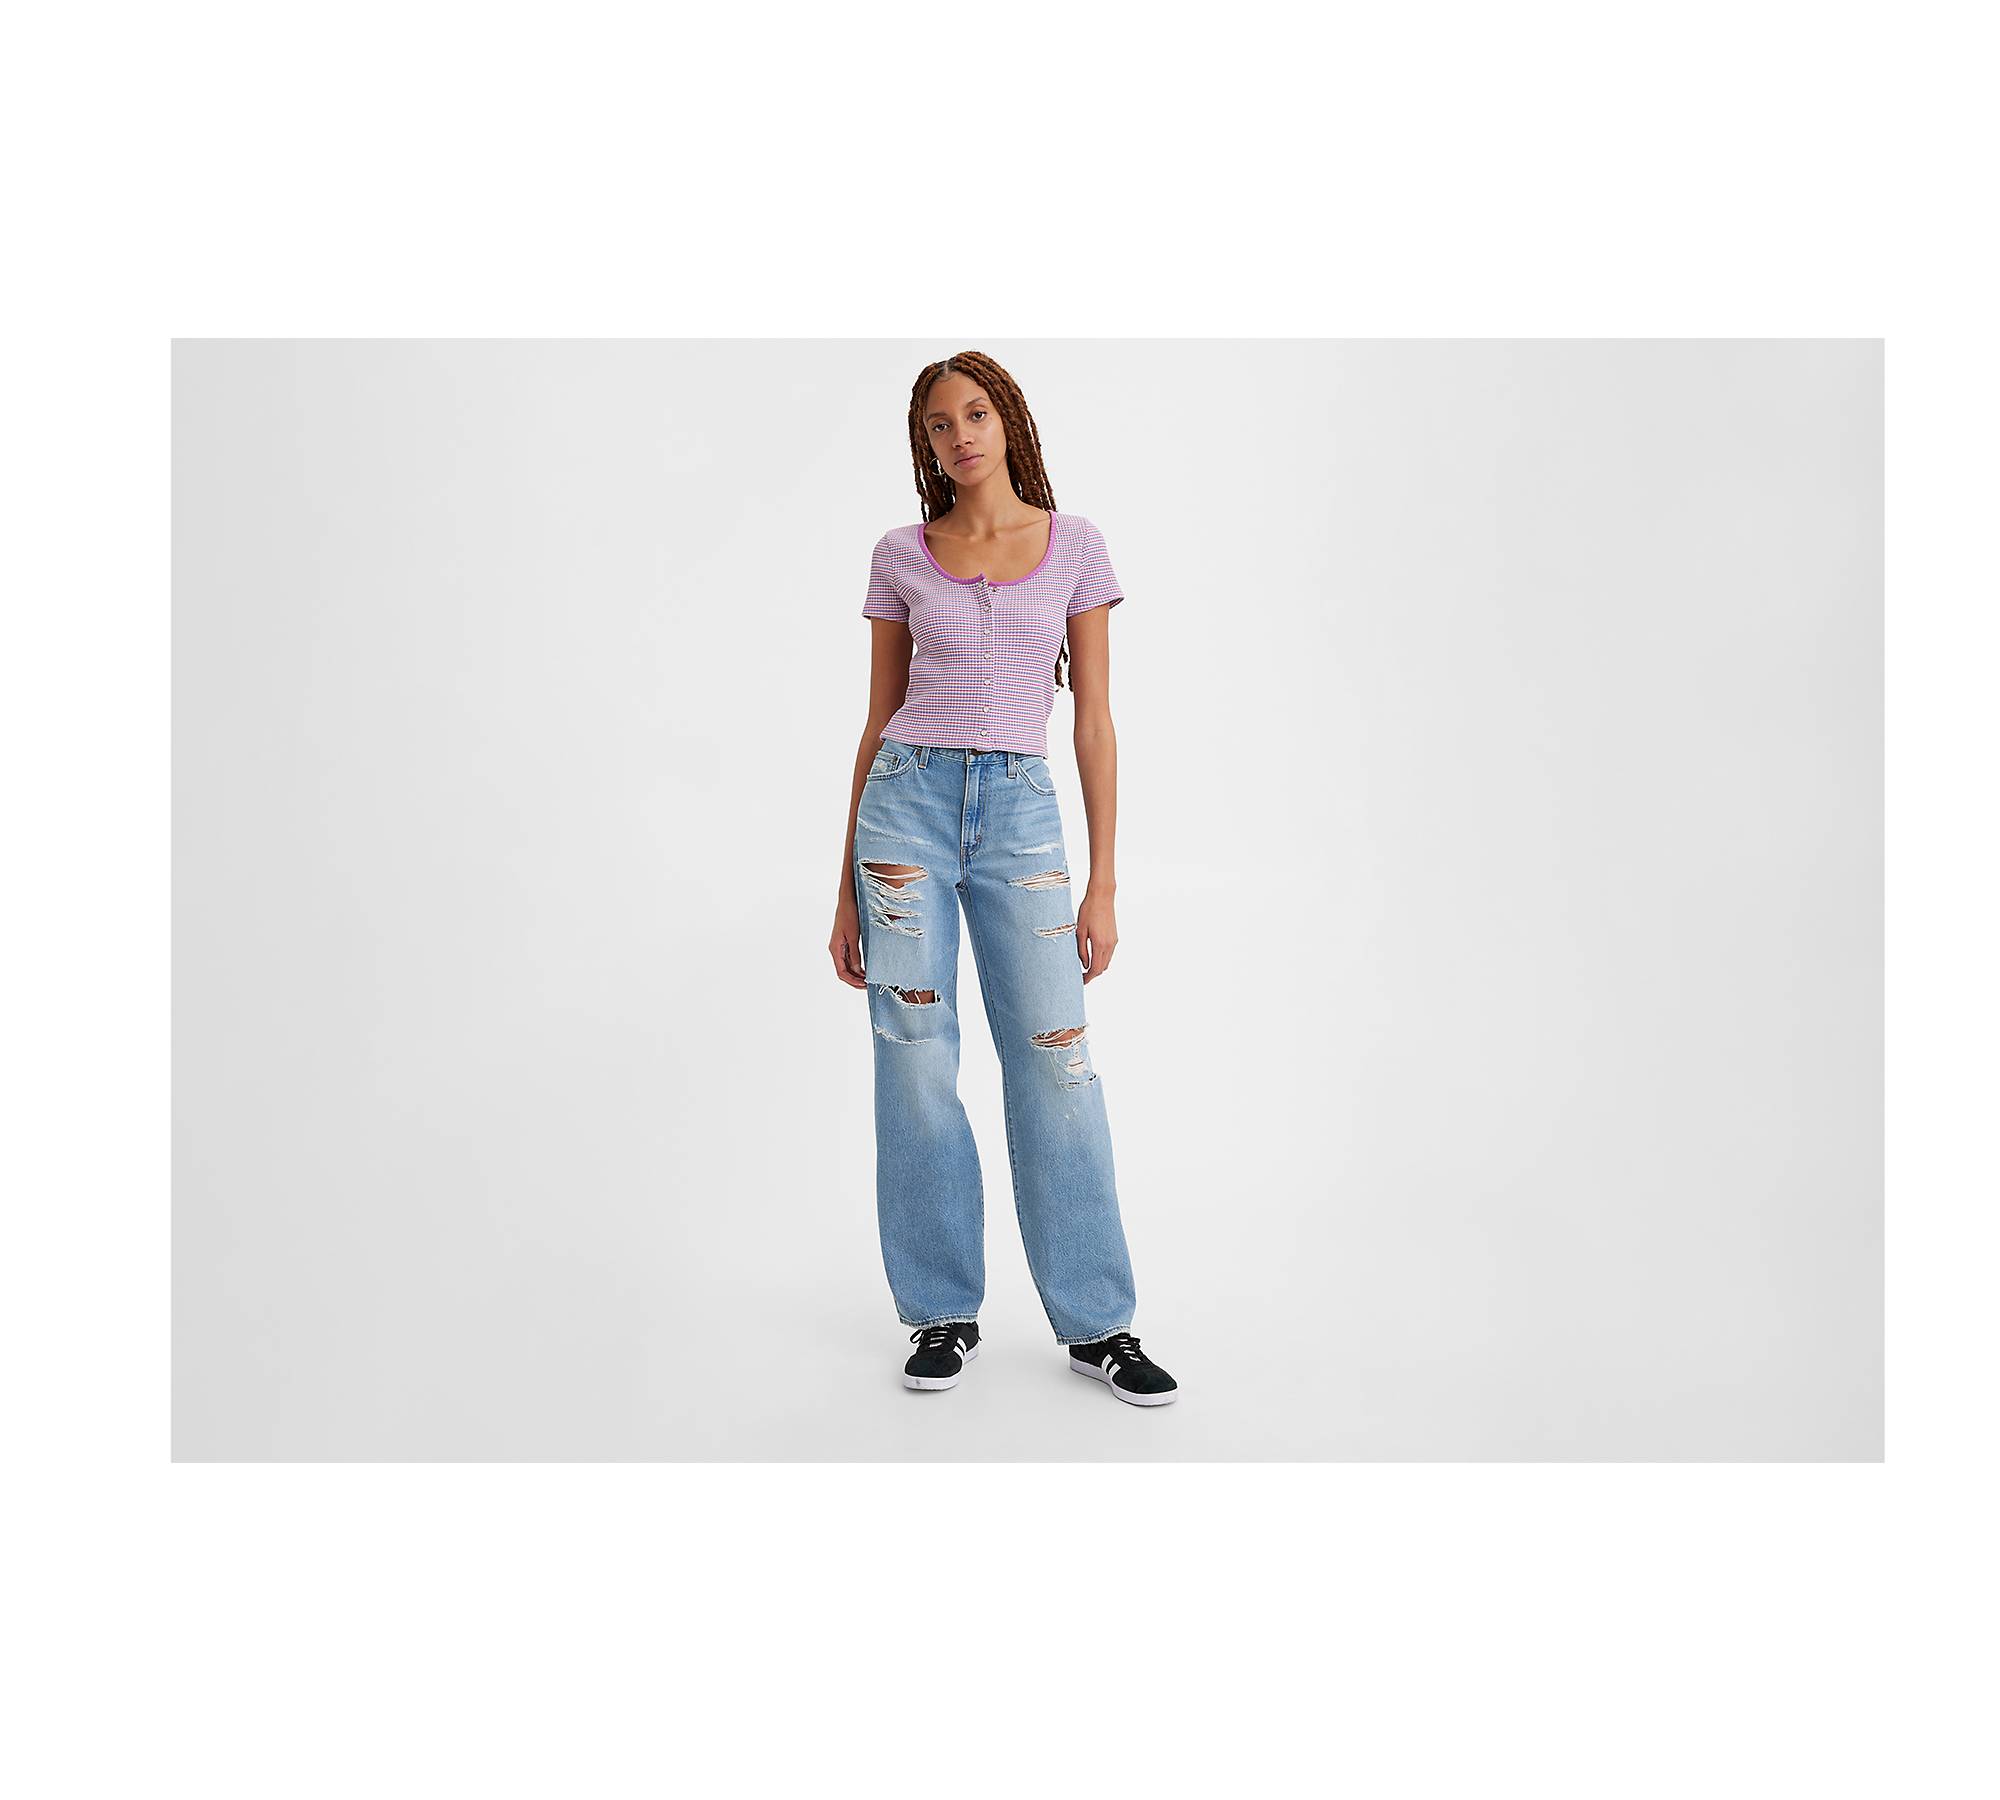 PacSun Women’s distressed high waist relaxed mom jeans medium size 30